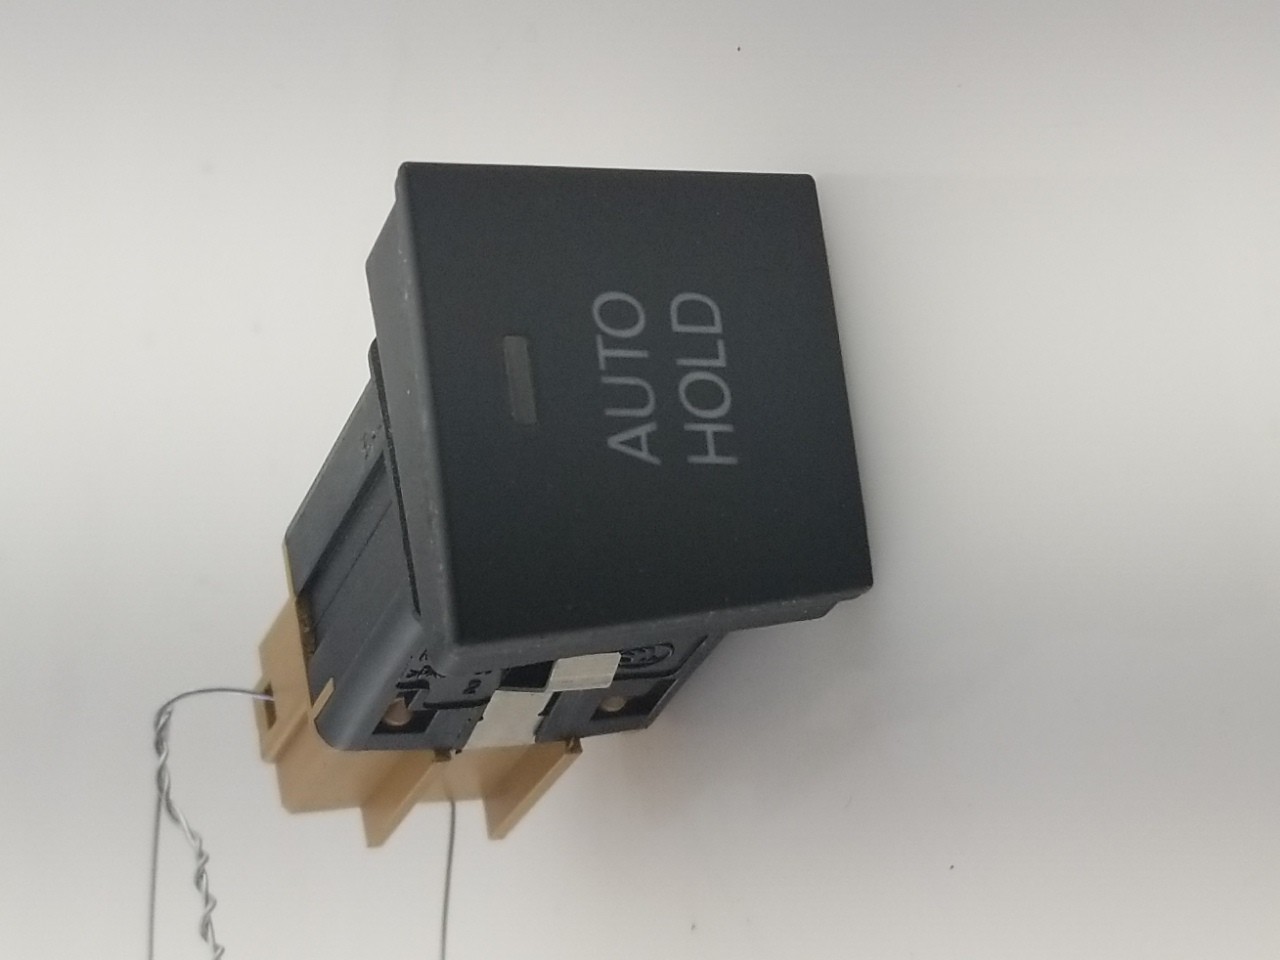 Auto Hold Switch